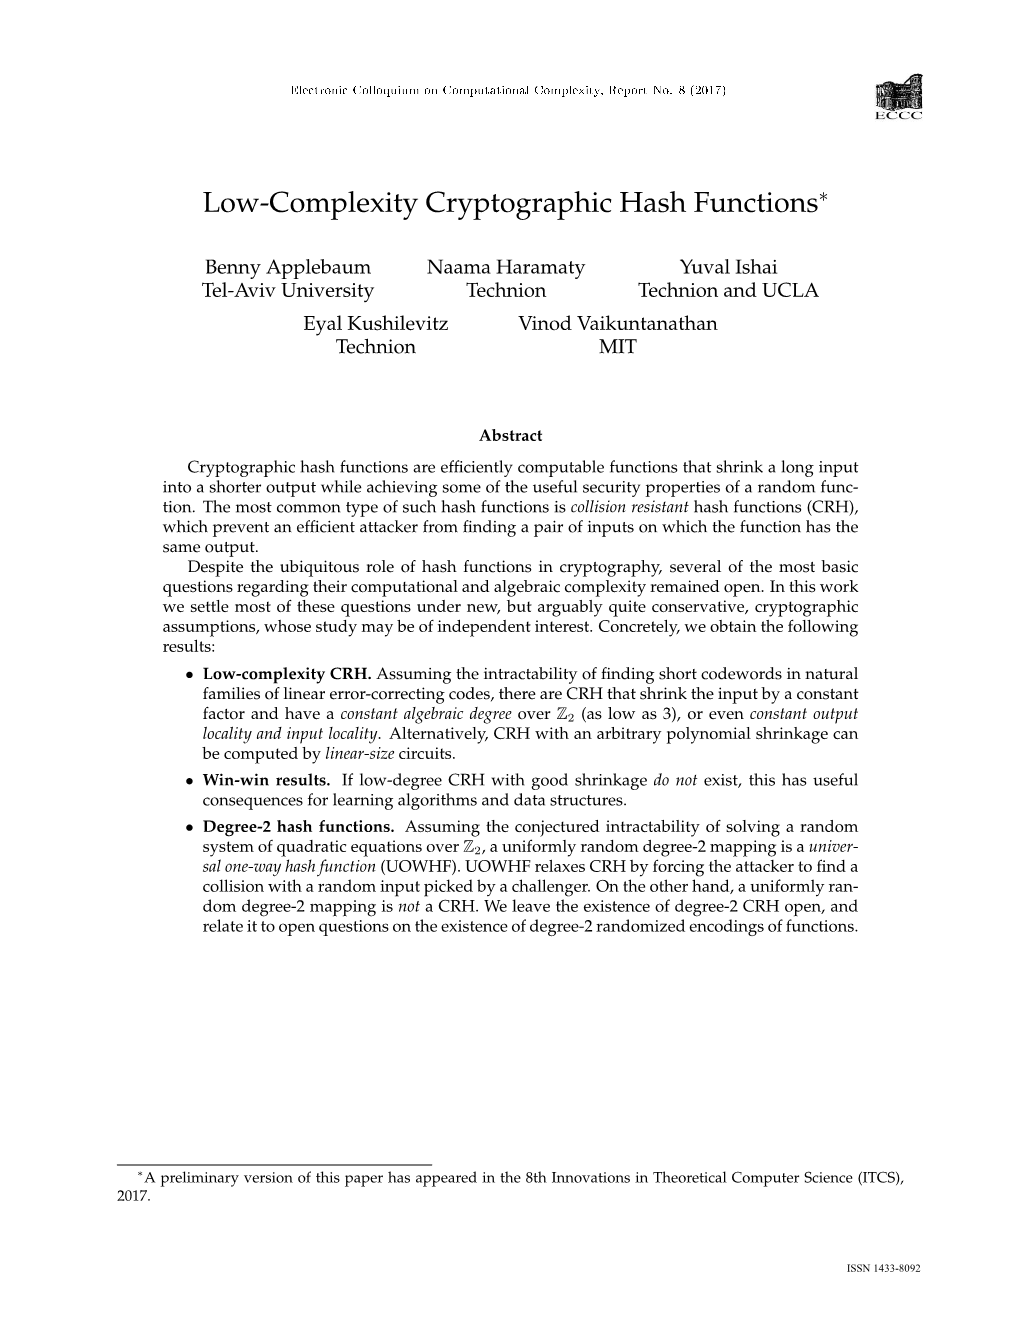 Low-Complexity Cryptographic Hash Functions∗